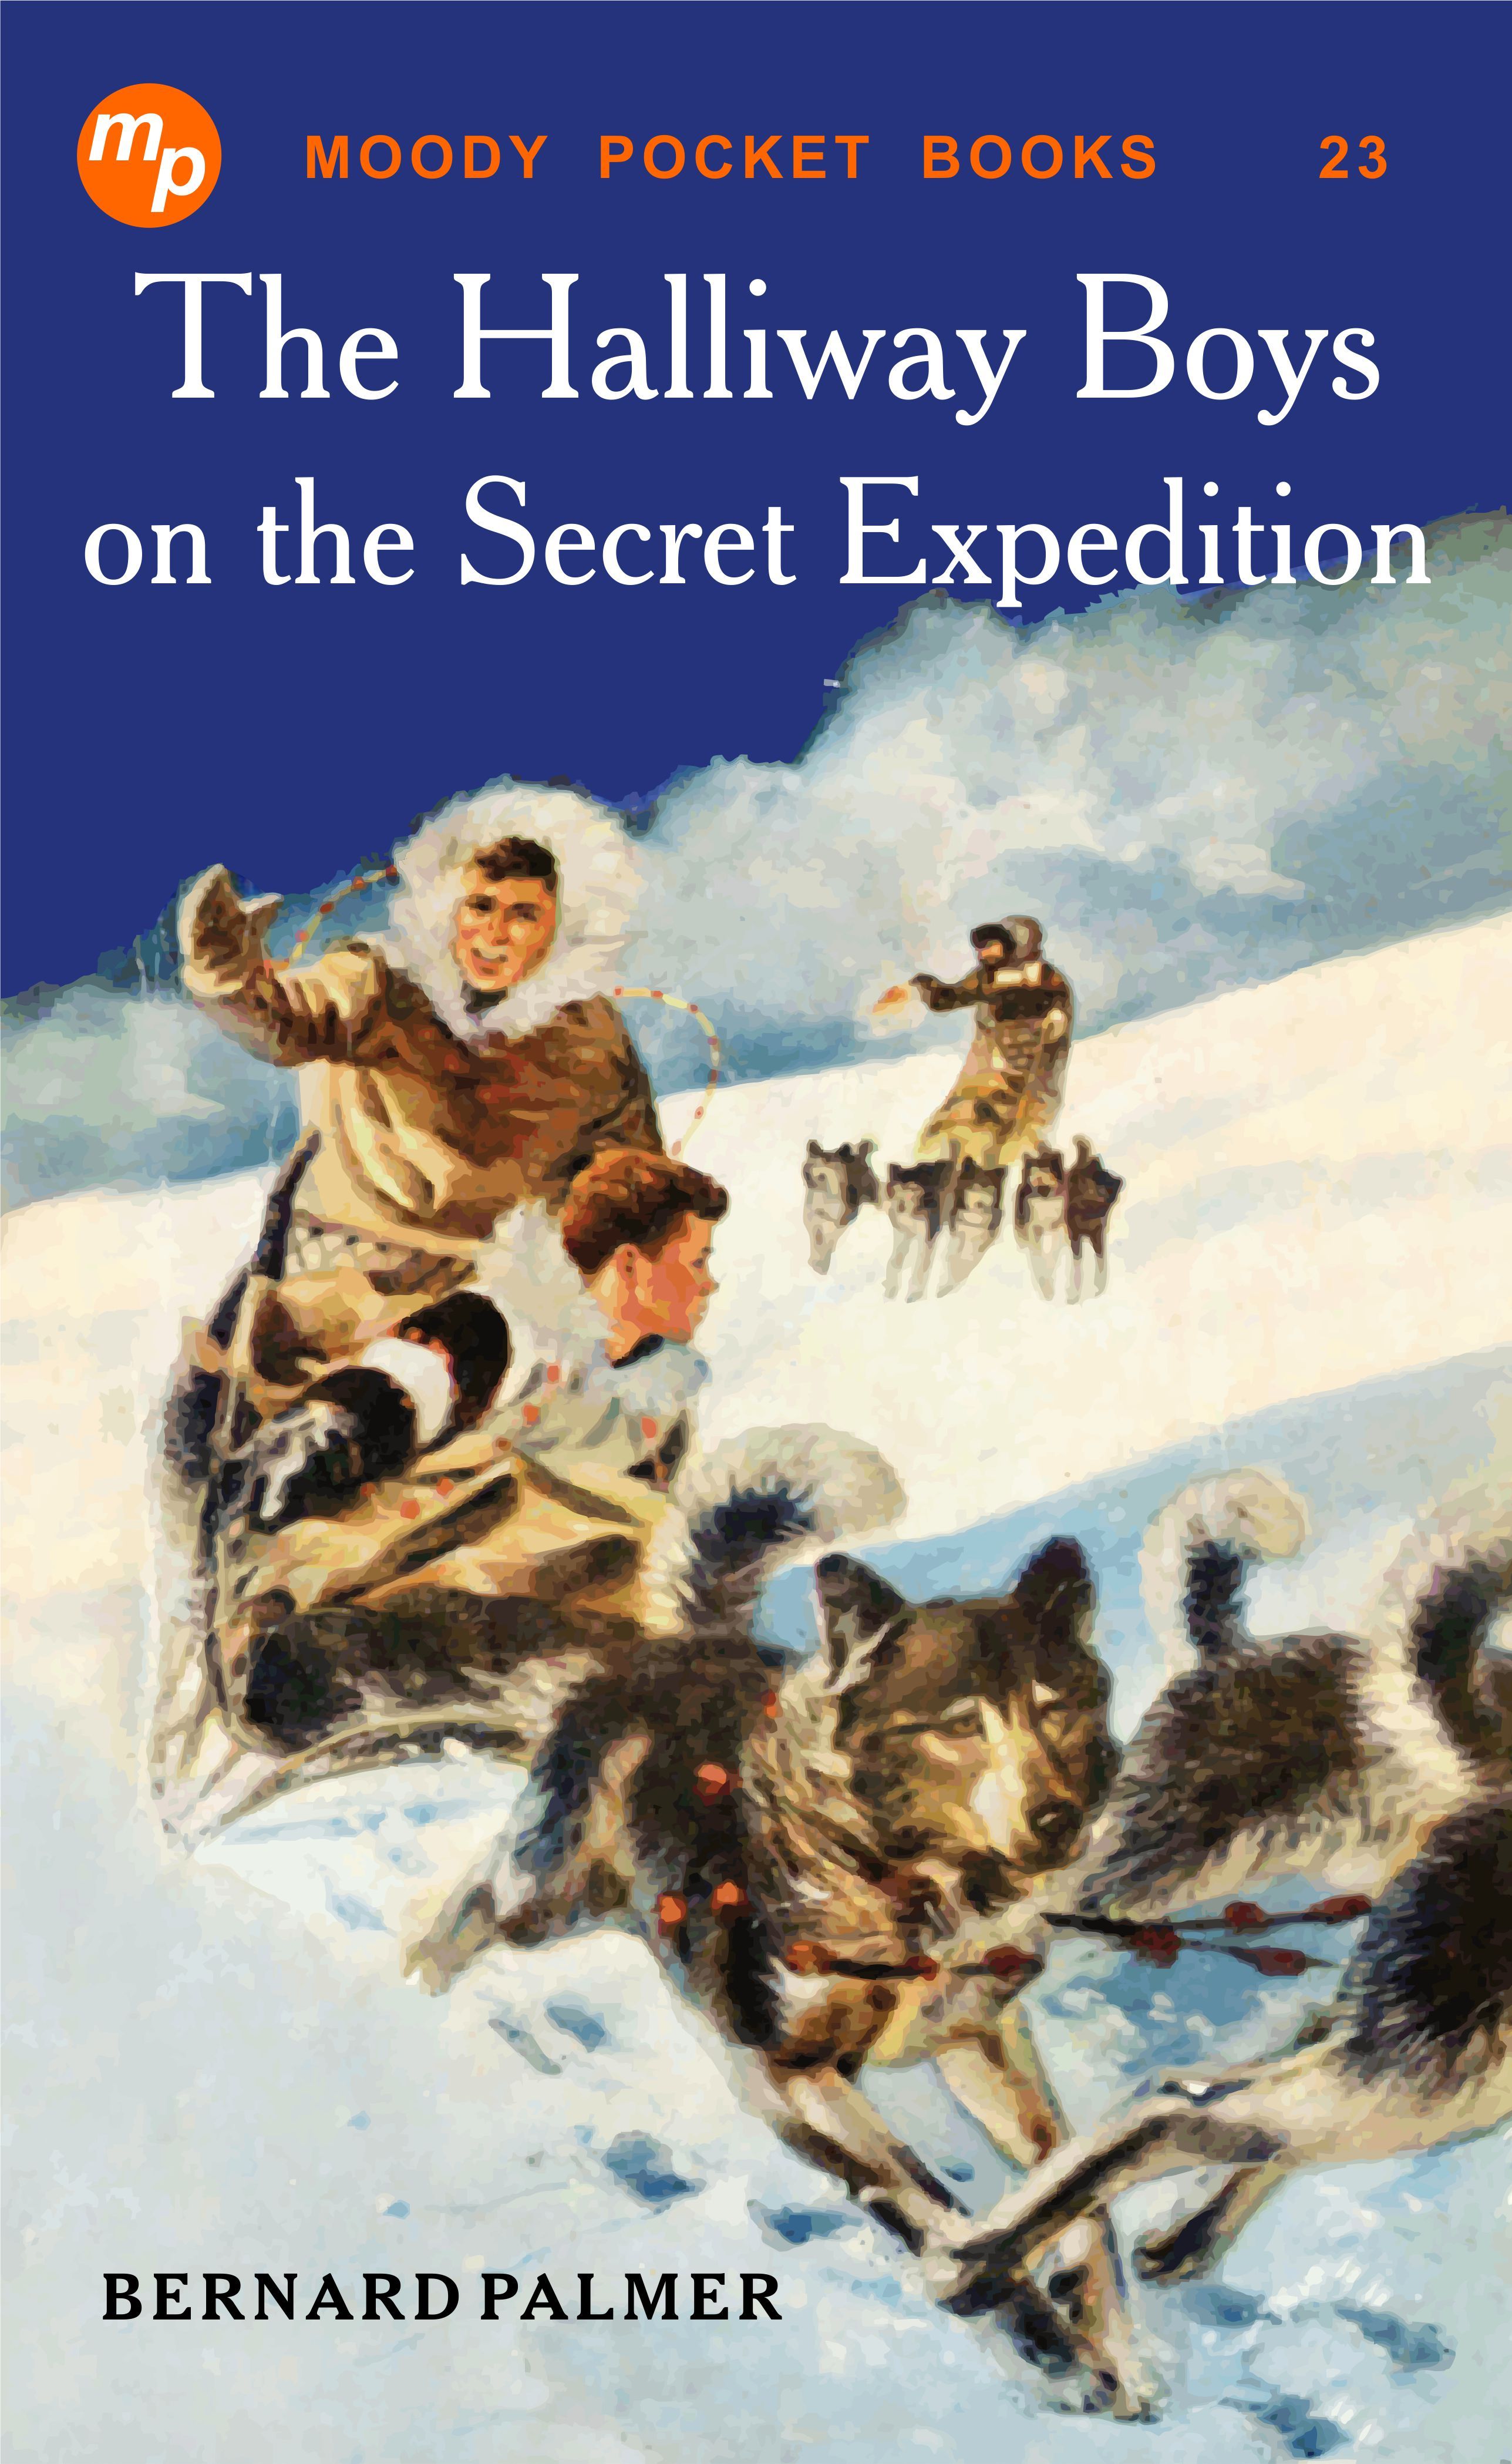 The Halliway Boys on the Secret Expedition